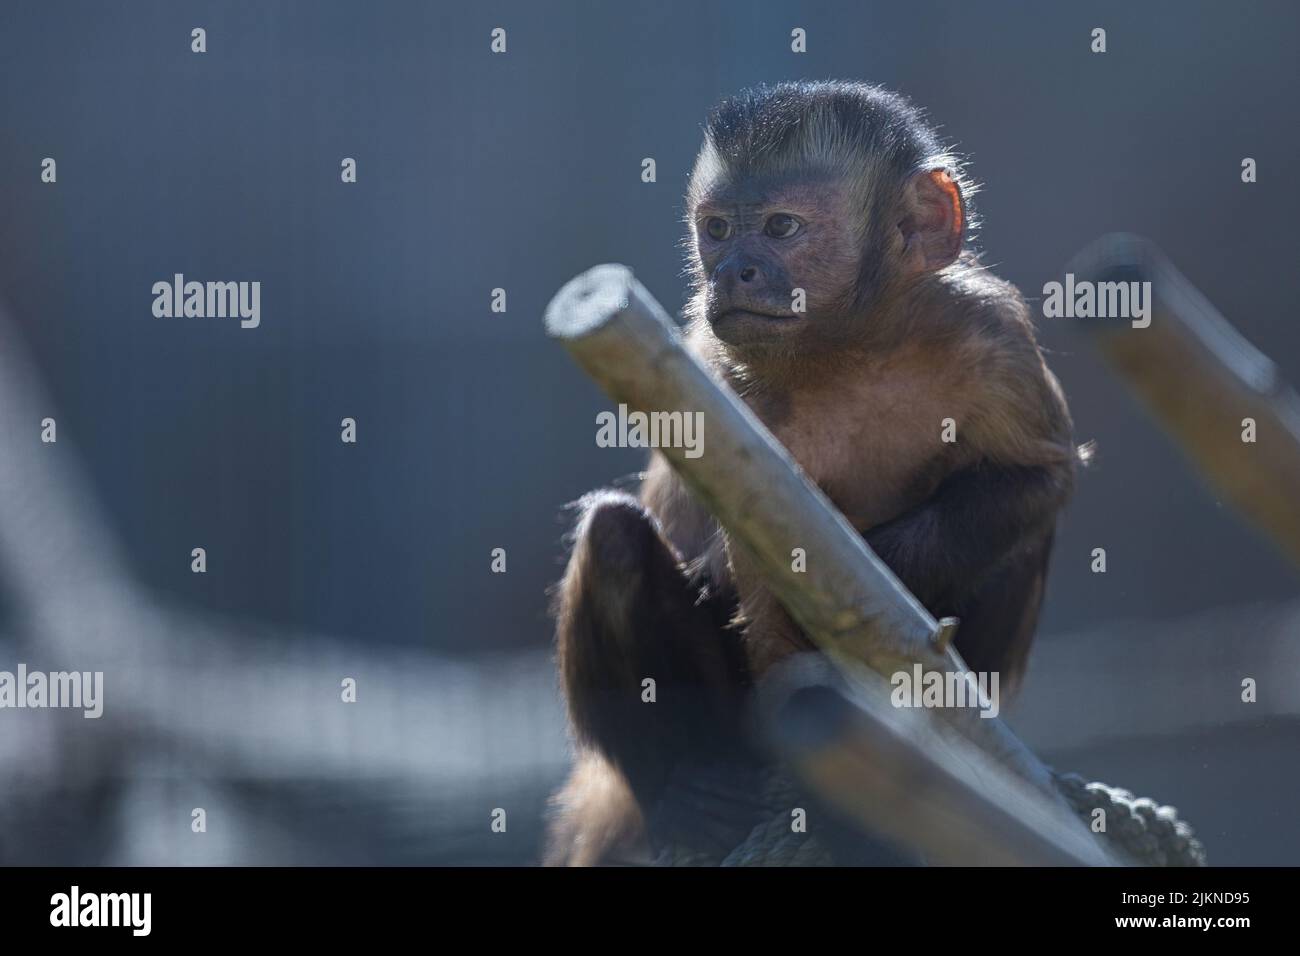 A shallow focus portrait of a baby monkey Stock Photo